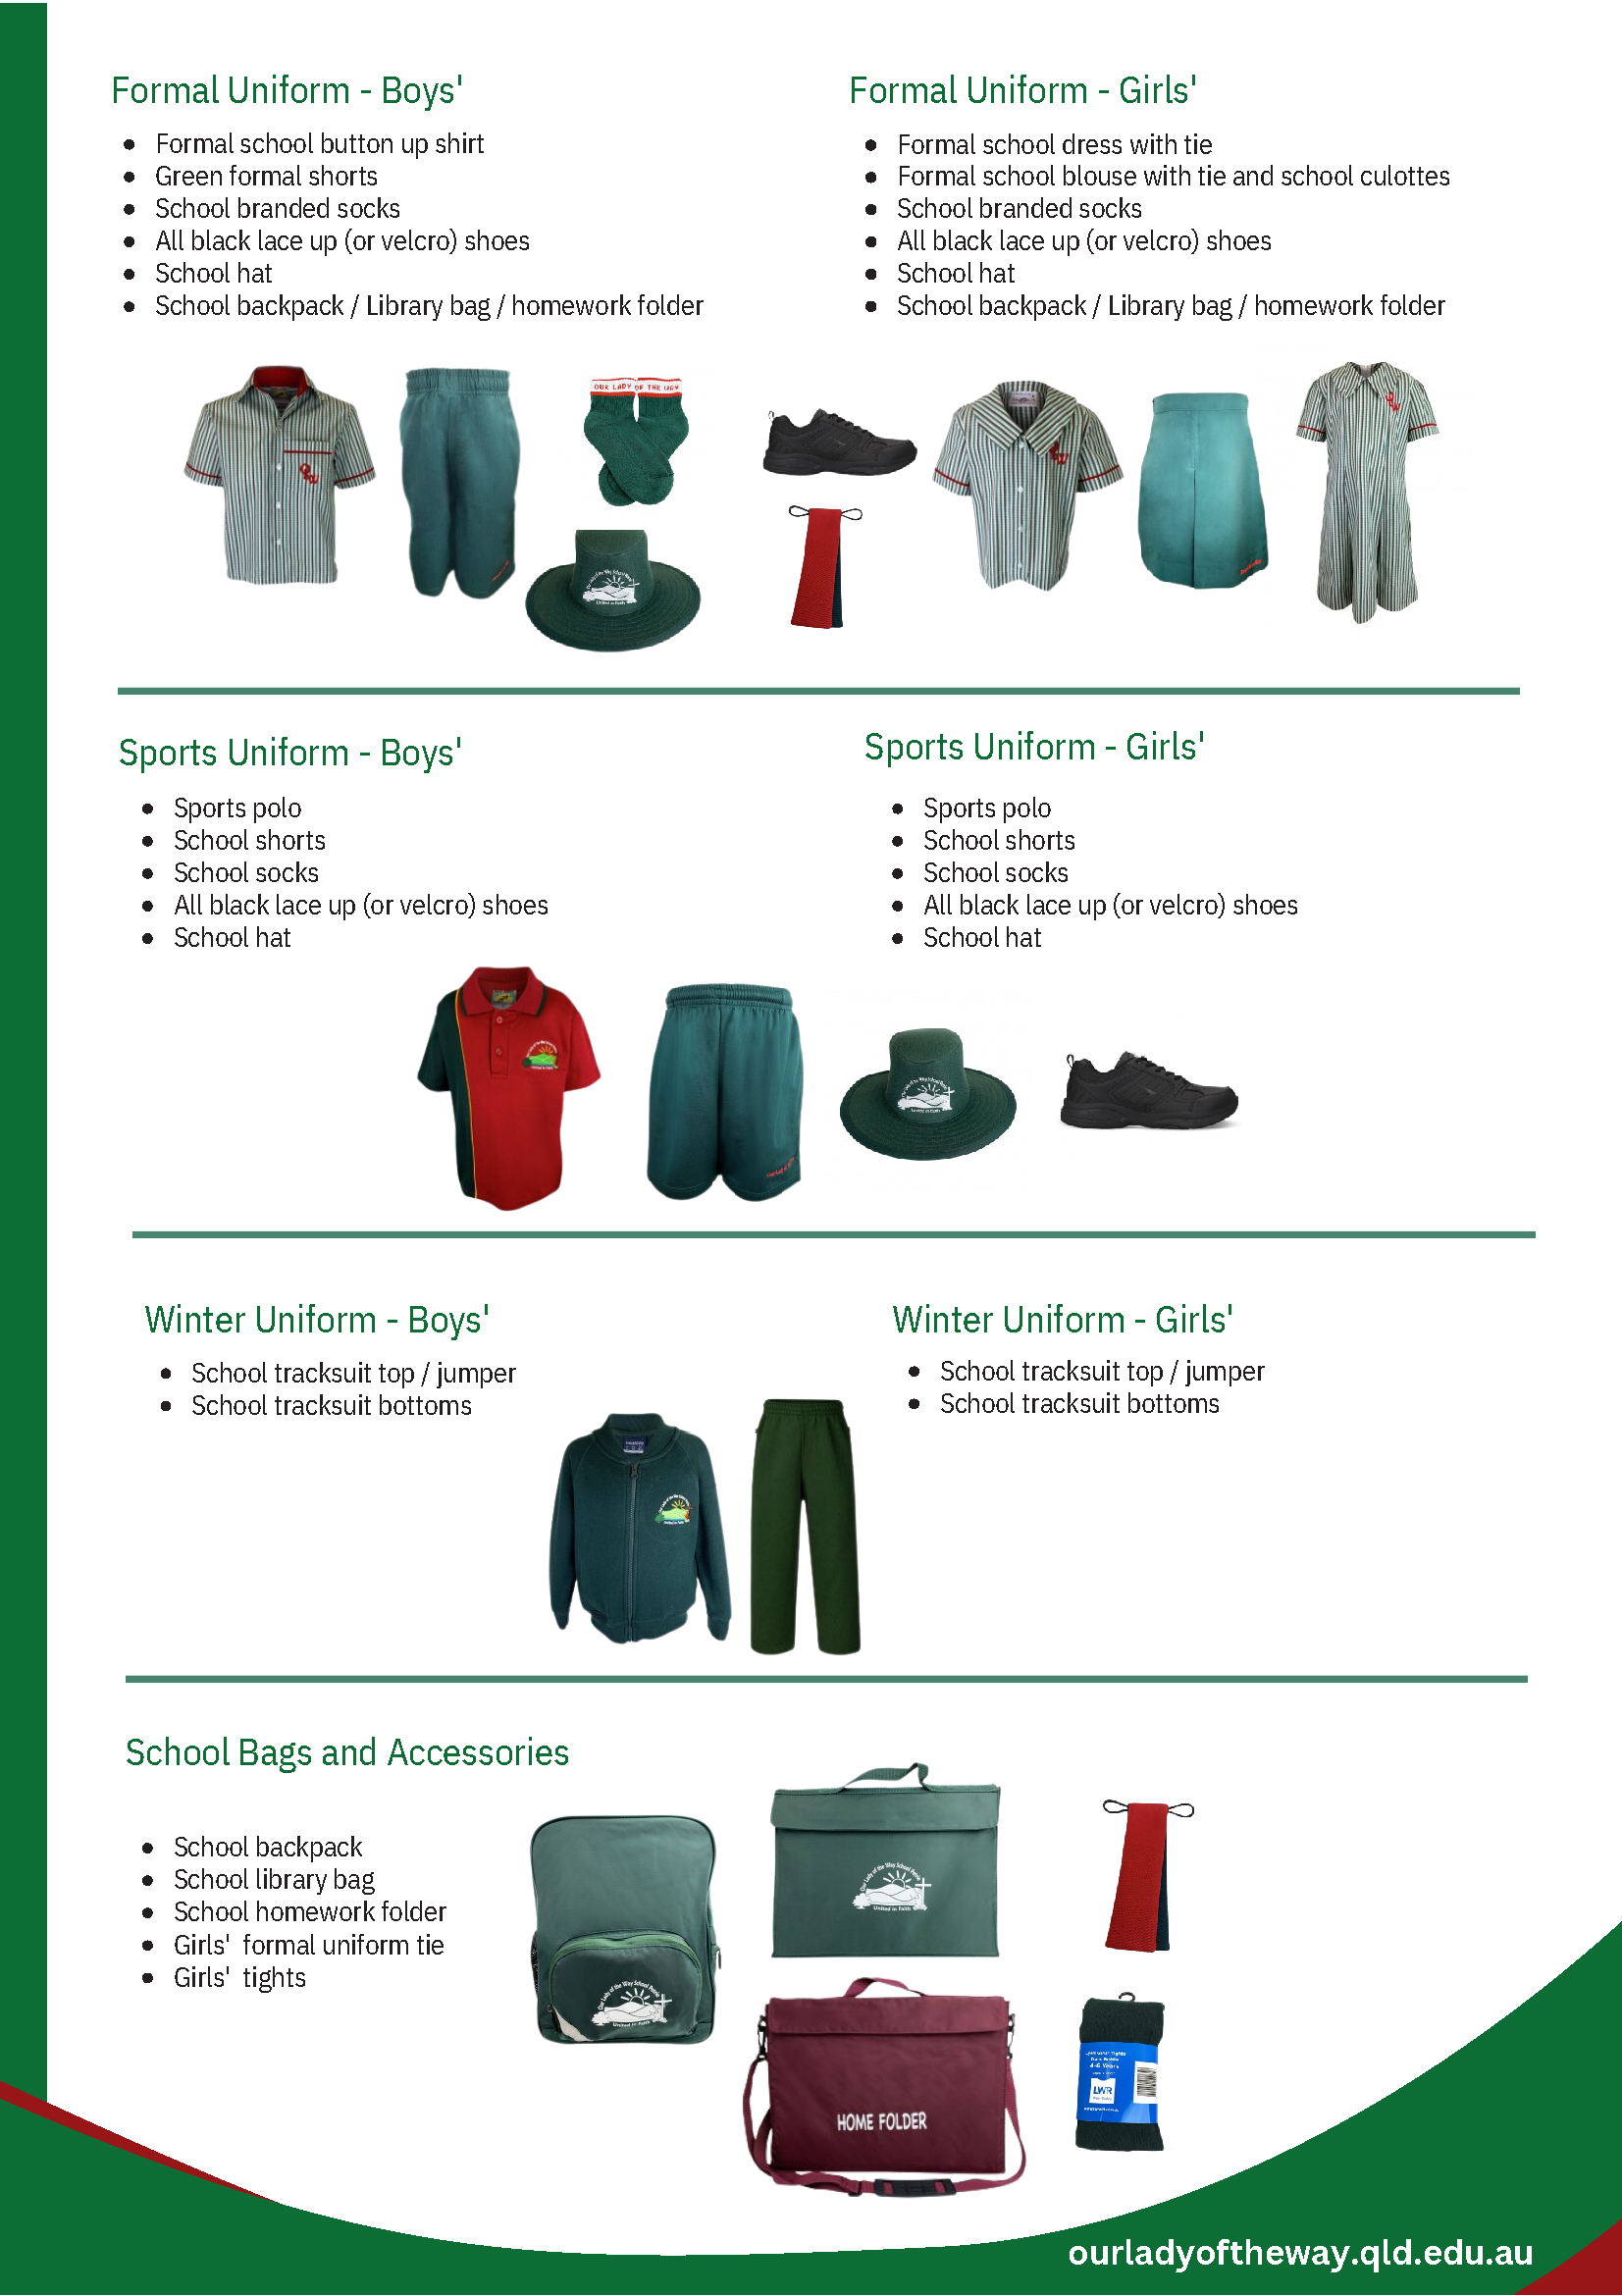 OLW Uniform Flyer (2)_Page_2.png